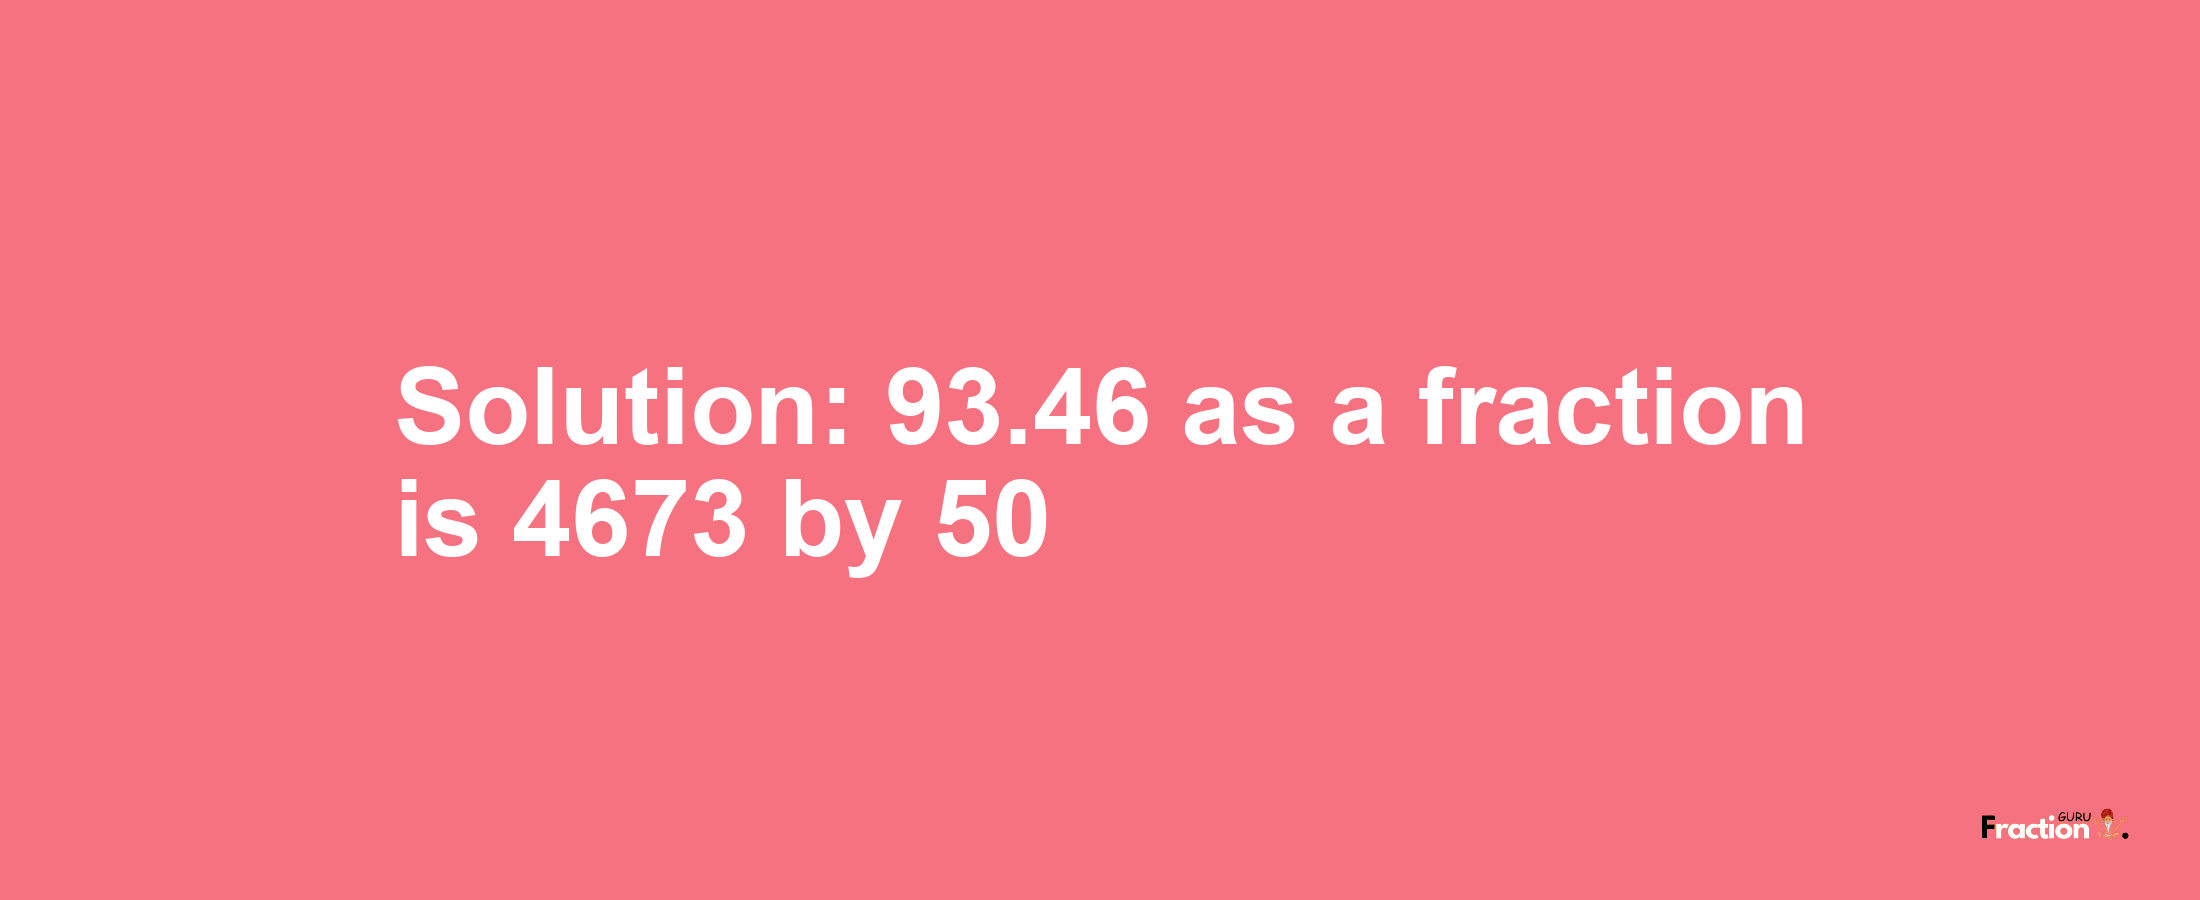 Solution:93.46 as a fraction is 4673/50